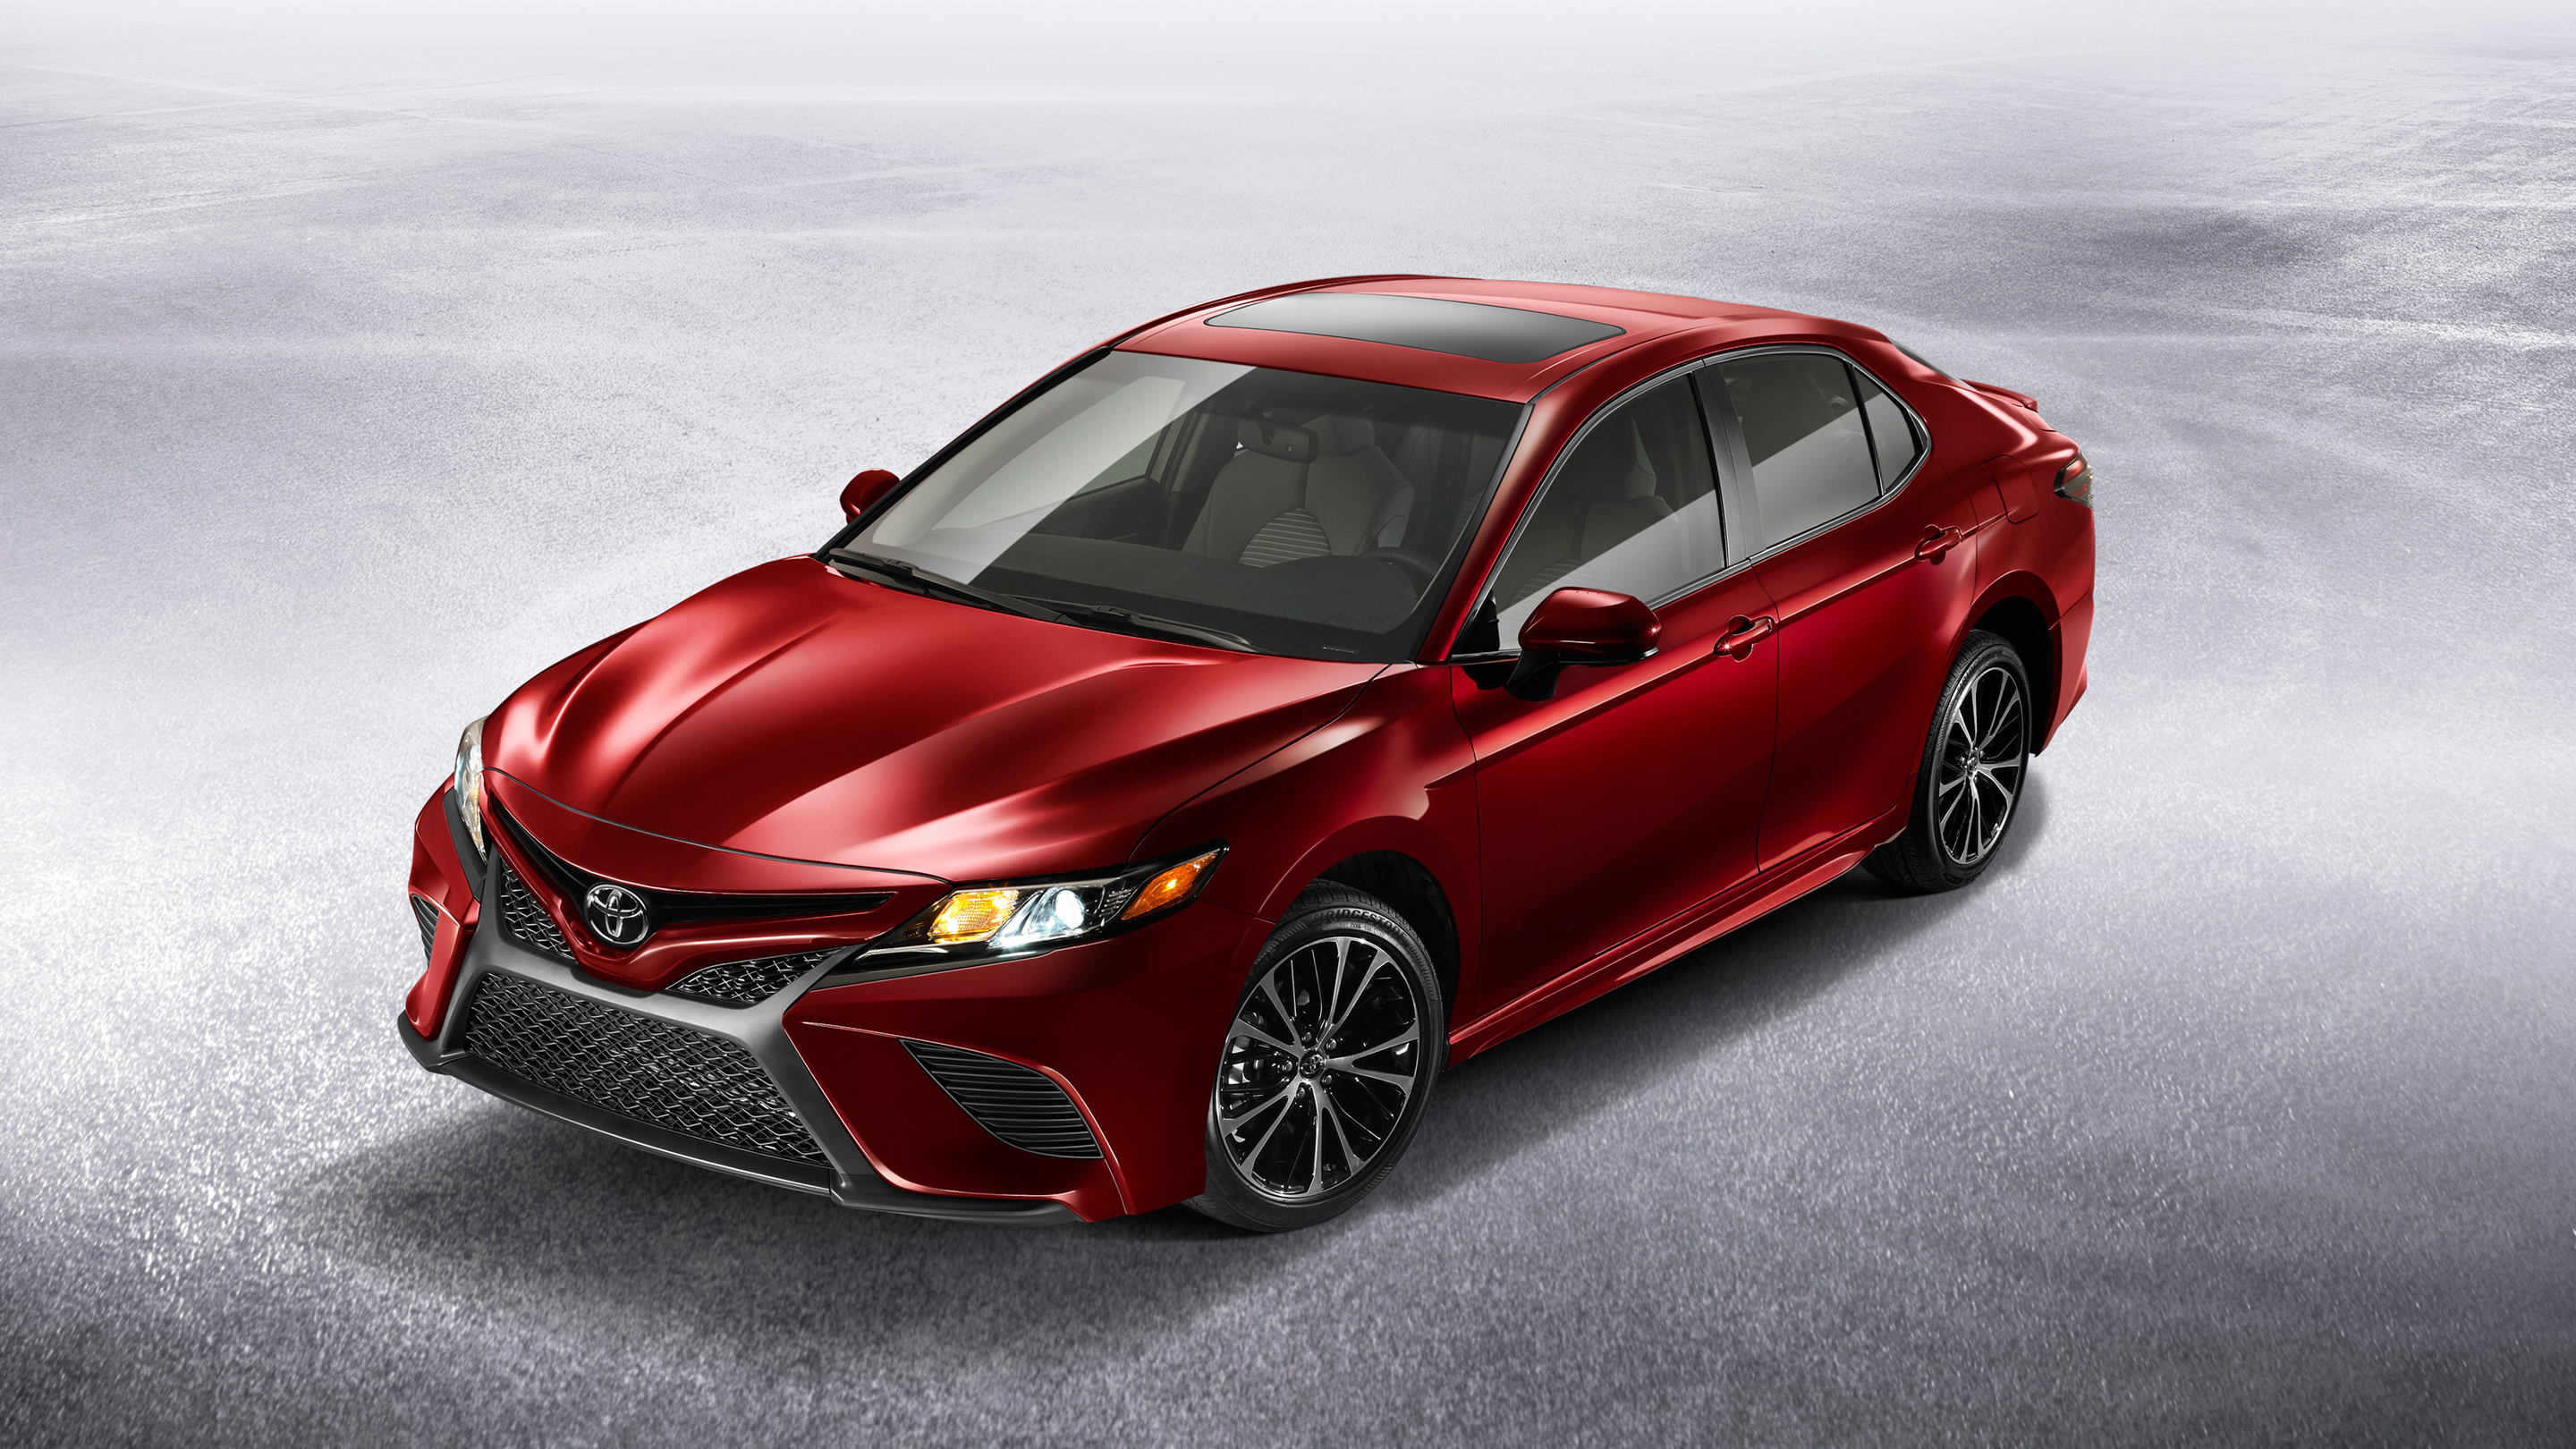 2018 Toyota Camry SE 2 Wallpaper | HD Car Wallpapers | ID #10067